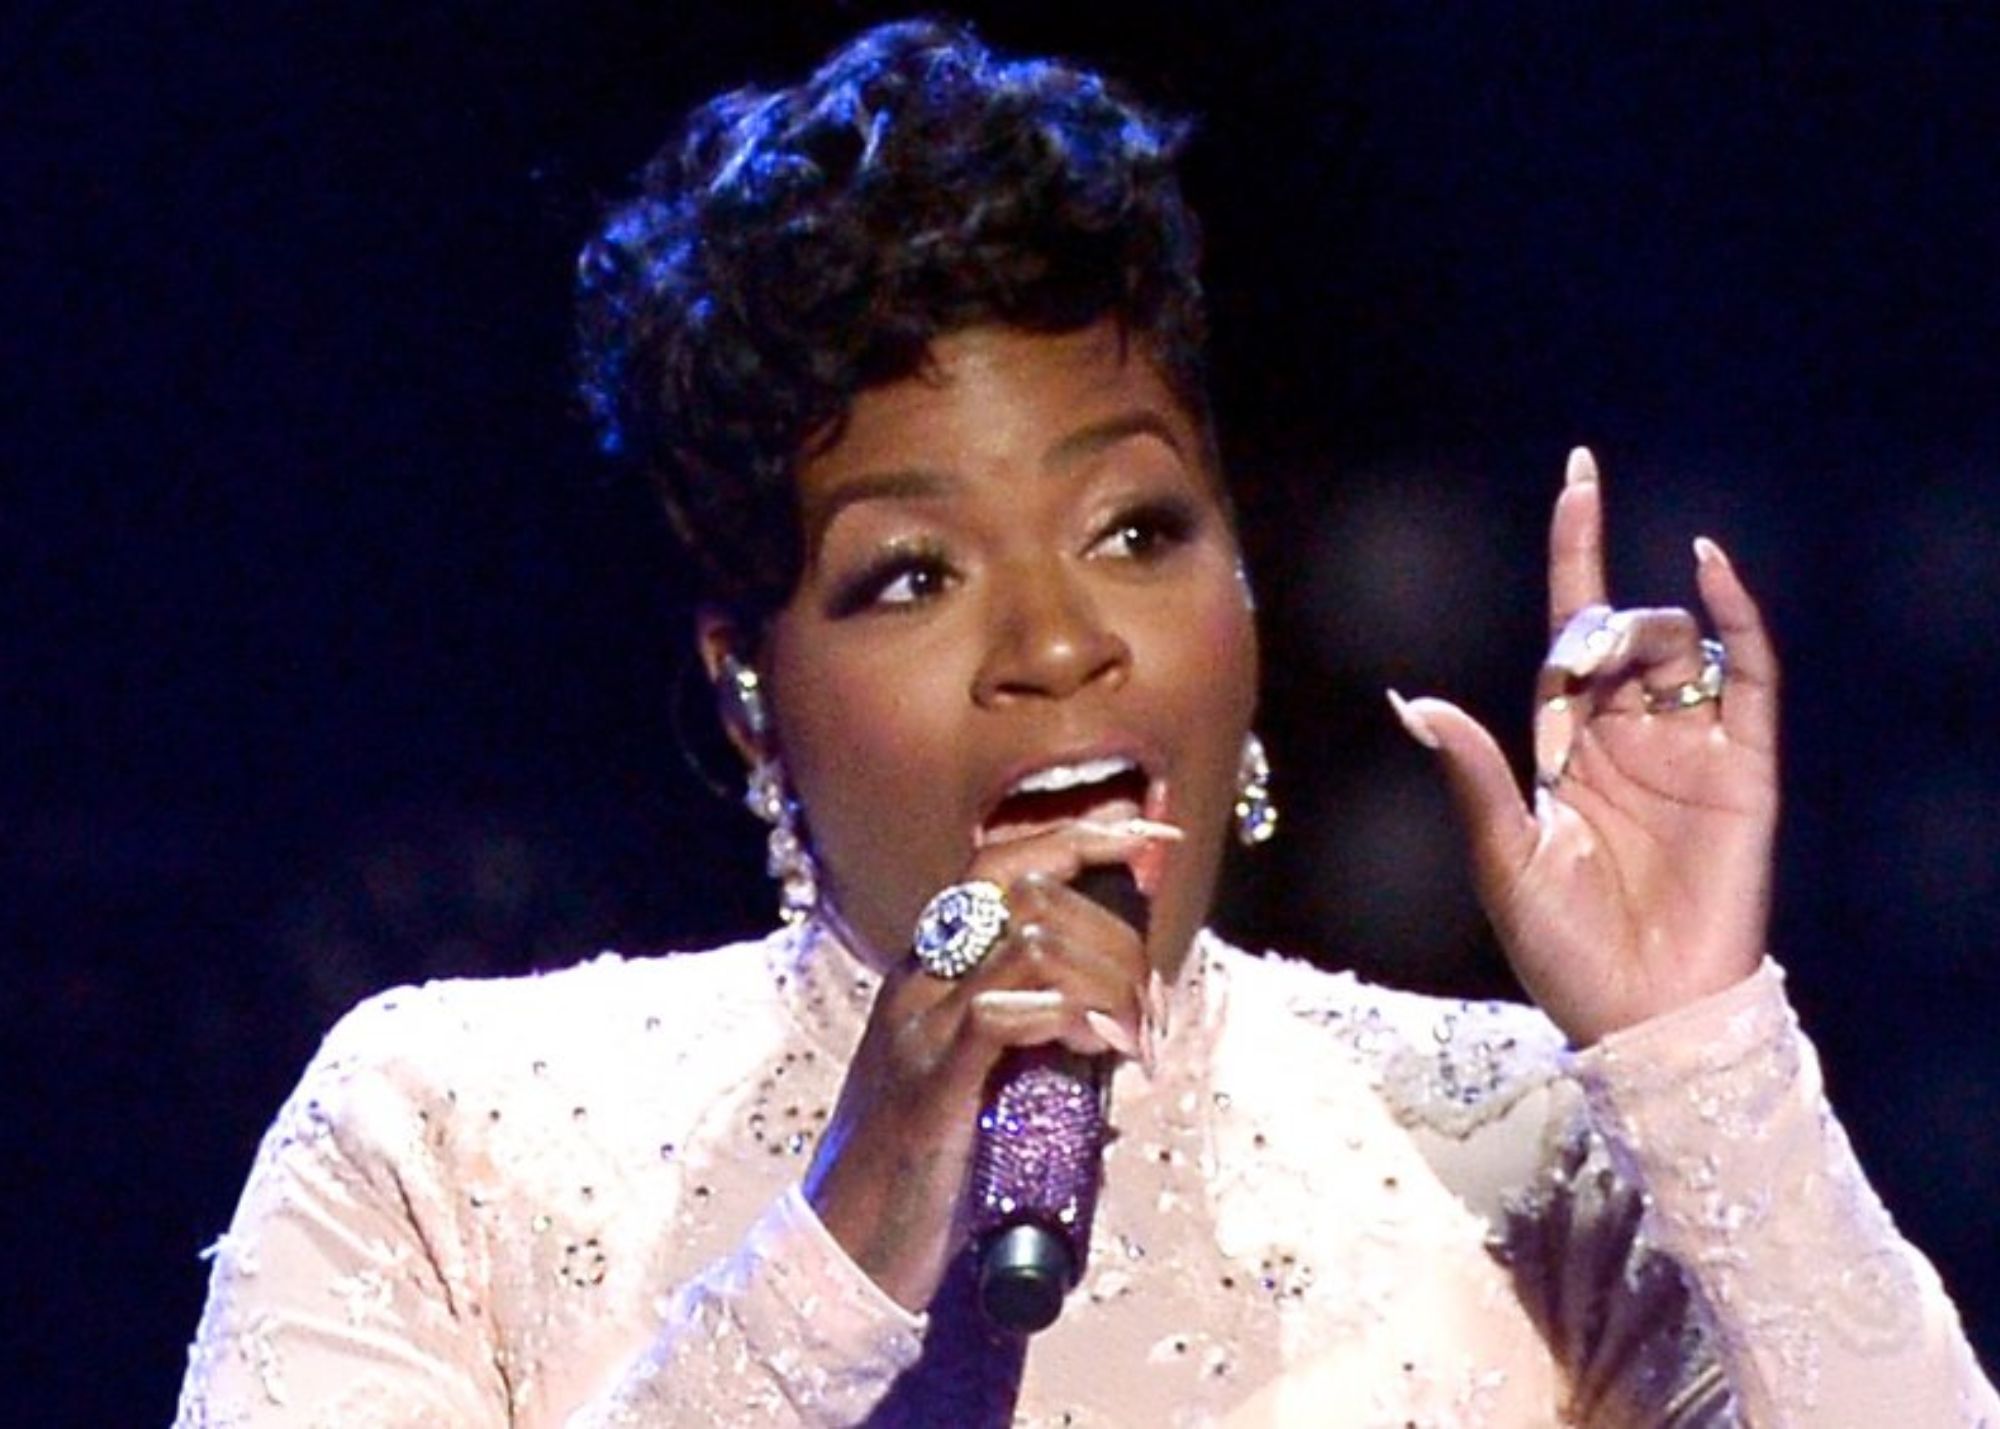 Fantasia holding a microphone while singing infront of many people